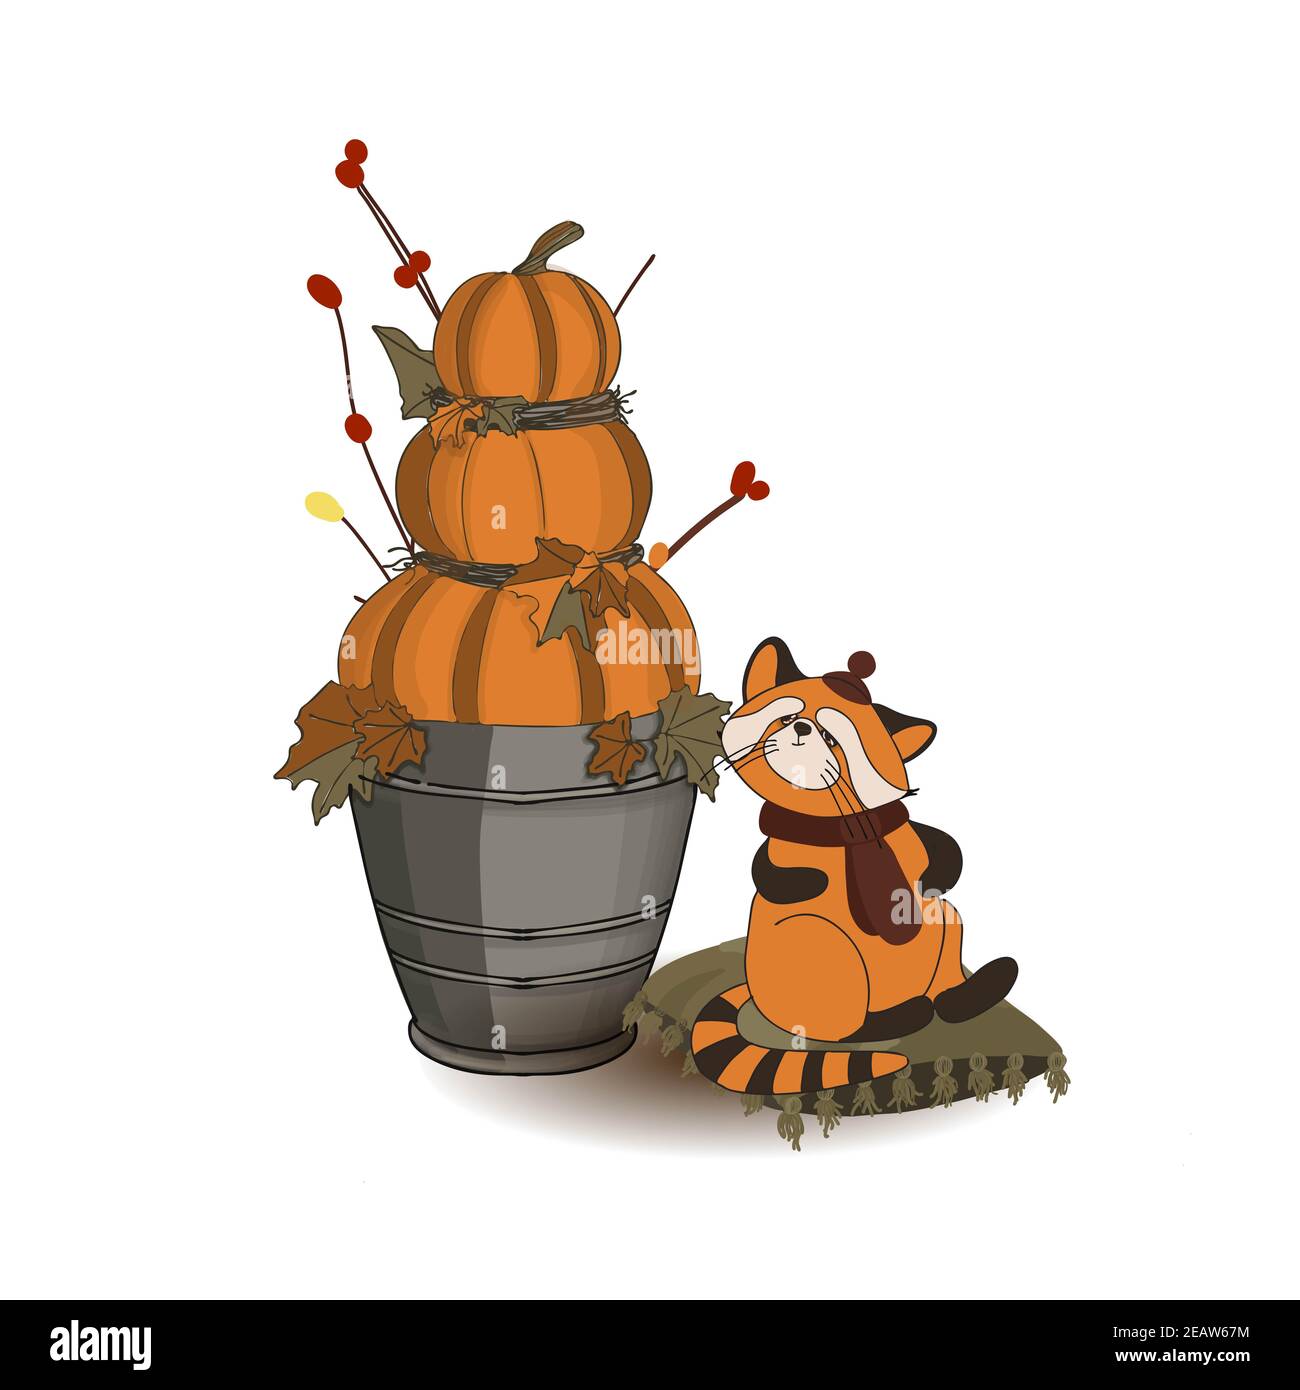 Autumn composition. Pumpkin and autumn twigs isolated on white background. Red panda character. Cute animals in a hat. Thanksgiving card Stock Photo